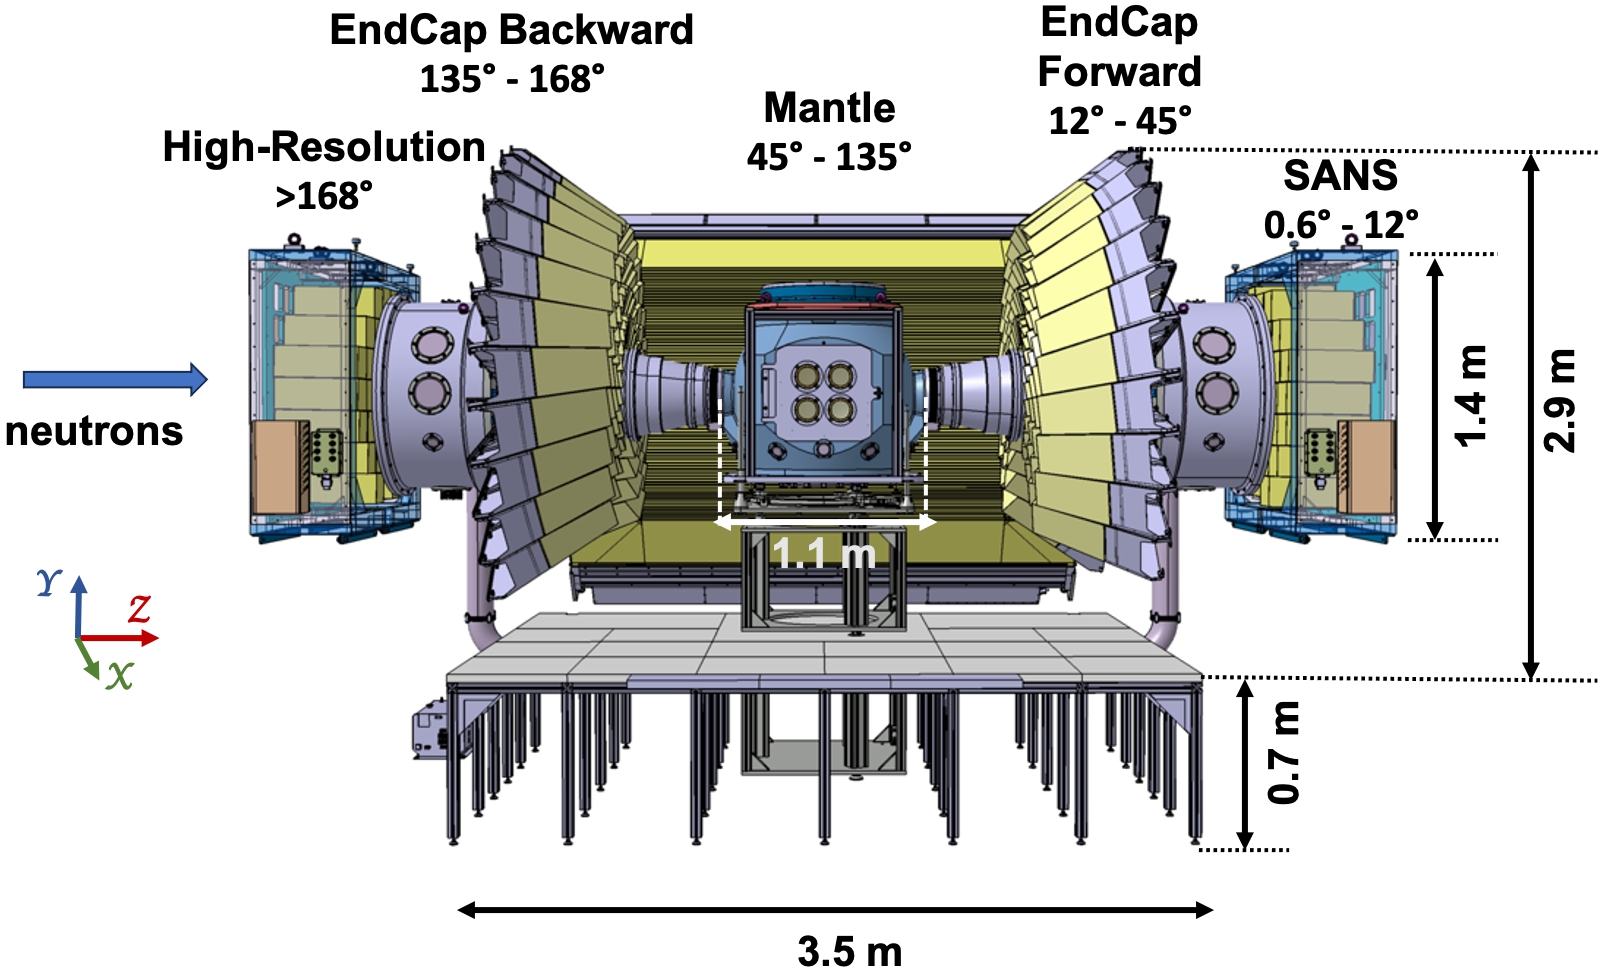 Layout of the DREAM sample scattering system showing the sample vessel and the detectors. The angle covered by each detector is marked on the figure. The distance between the sample position and the entrance windows of the Mantle segments and the SUMO sectors in both Forward and Backward EndCap detectors is 1.1 m and the distance between the sample and the entrance windows of the cuboids in the High-Resolution detector is ∼2.5 m. The incoming beam direction is shown by the blue arrow. The drawing shows the angular coverage in full scope. Approximately 40% of the system will be available at the hot commissioning of the source, see text for details.